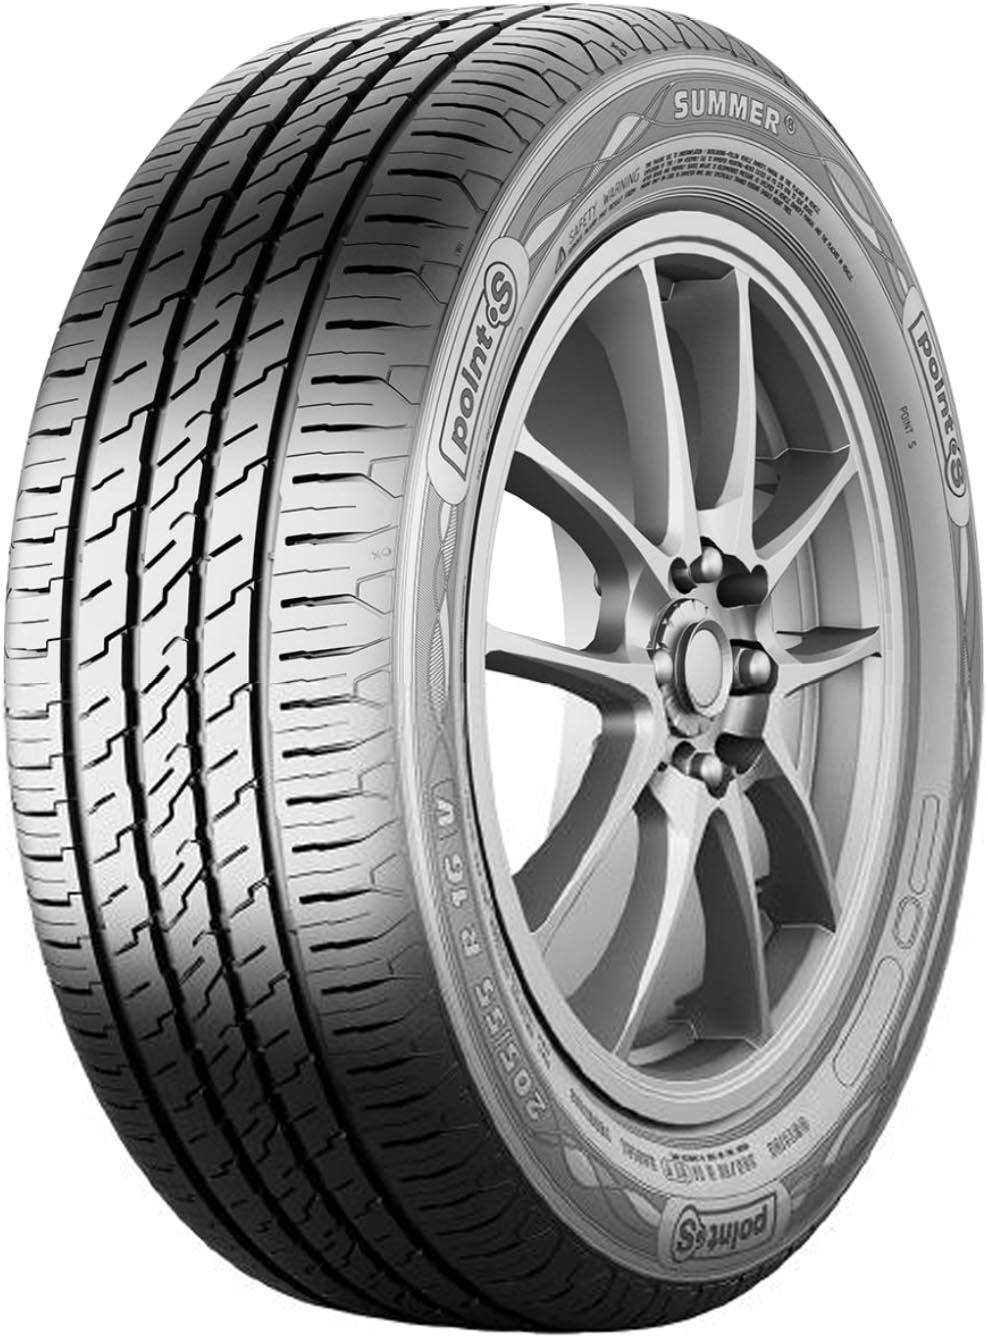 POINTS SUMMER S 155/70R13 75T